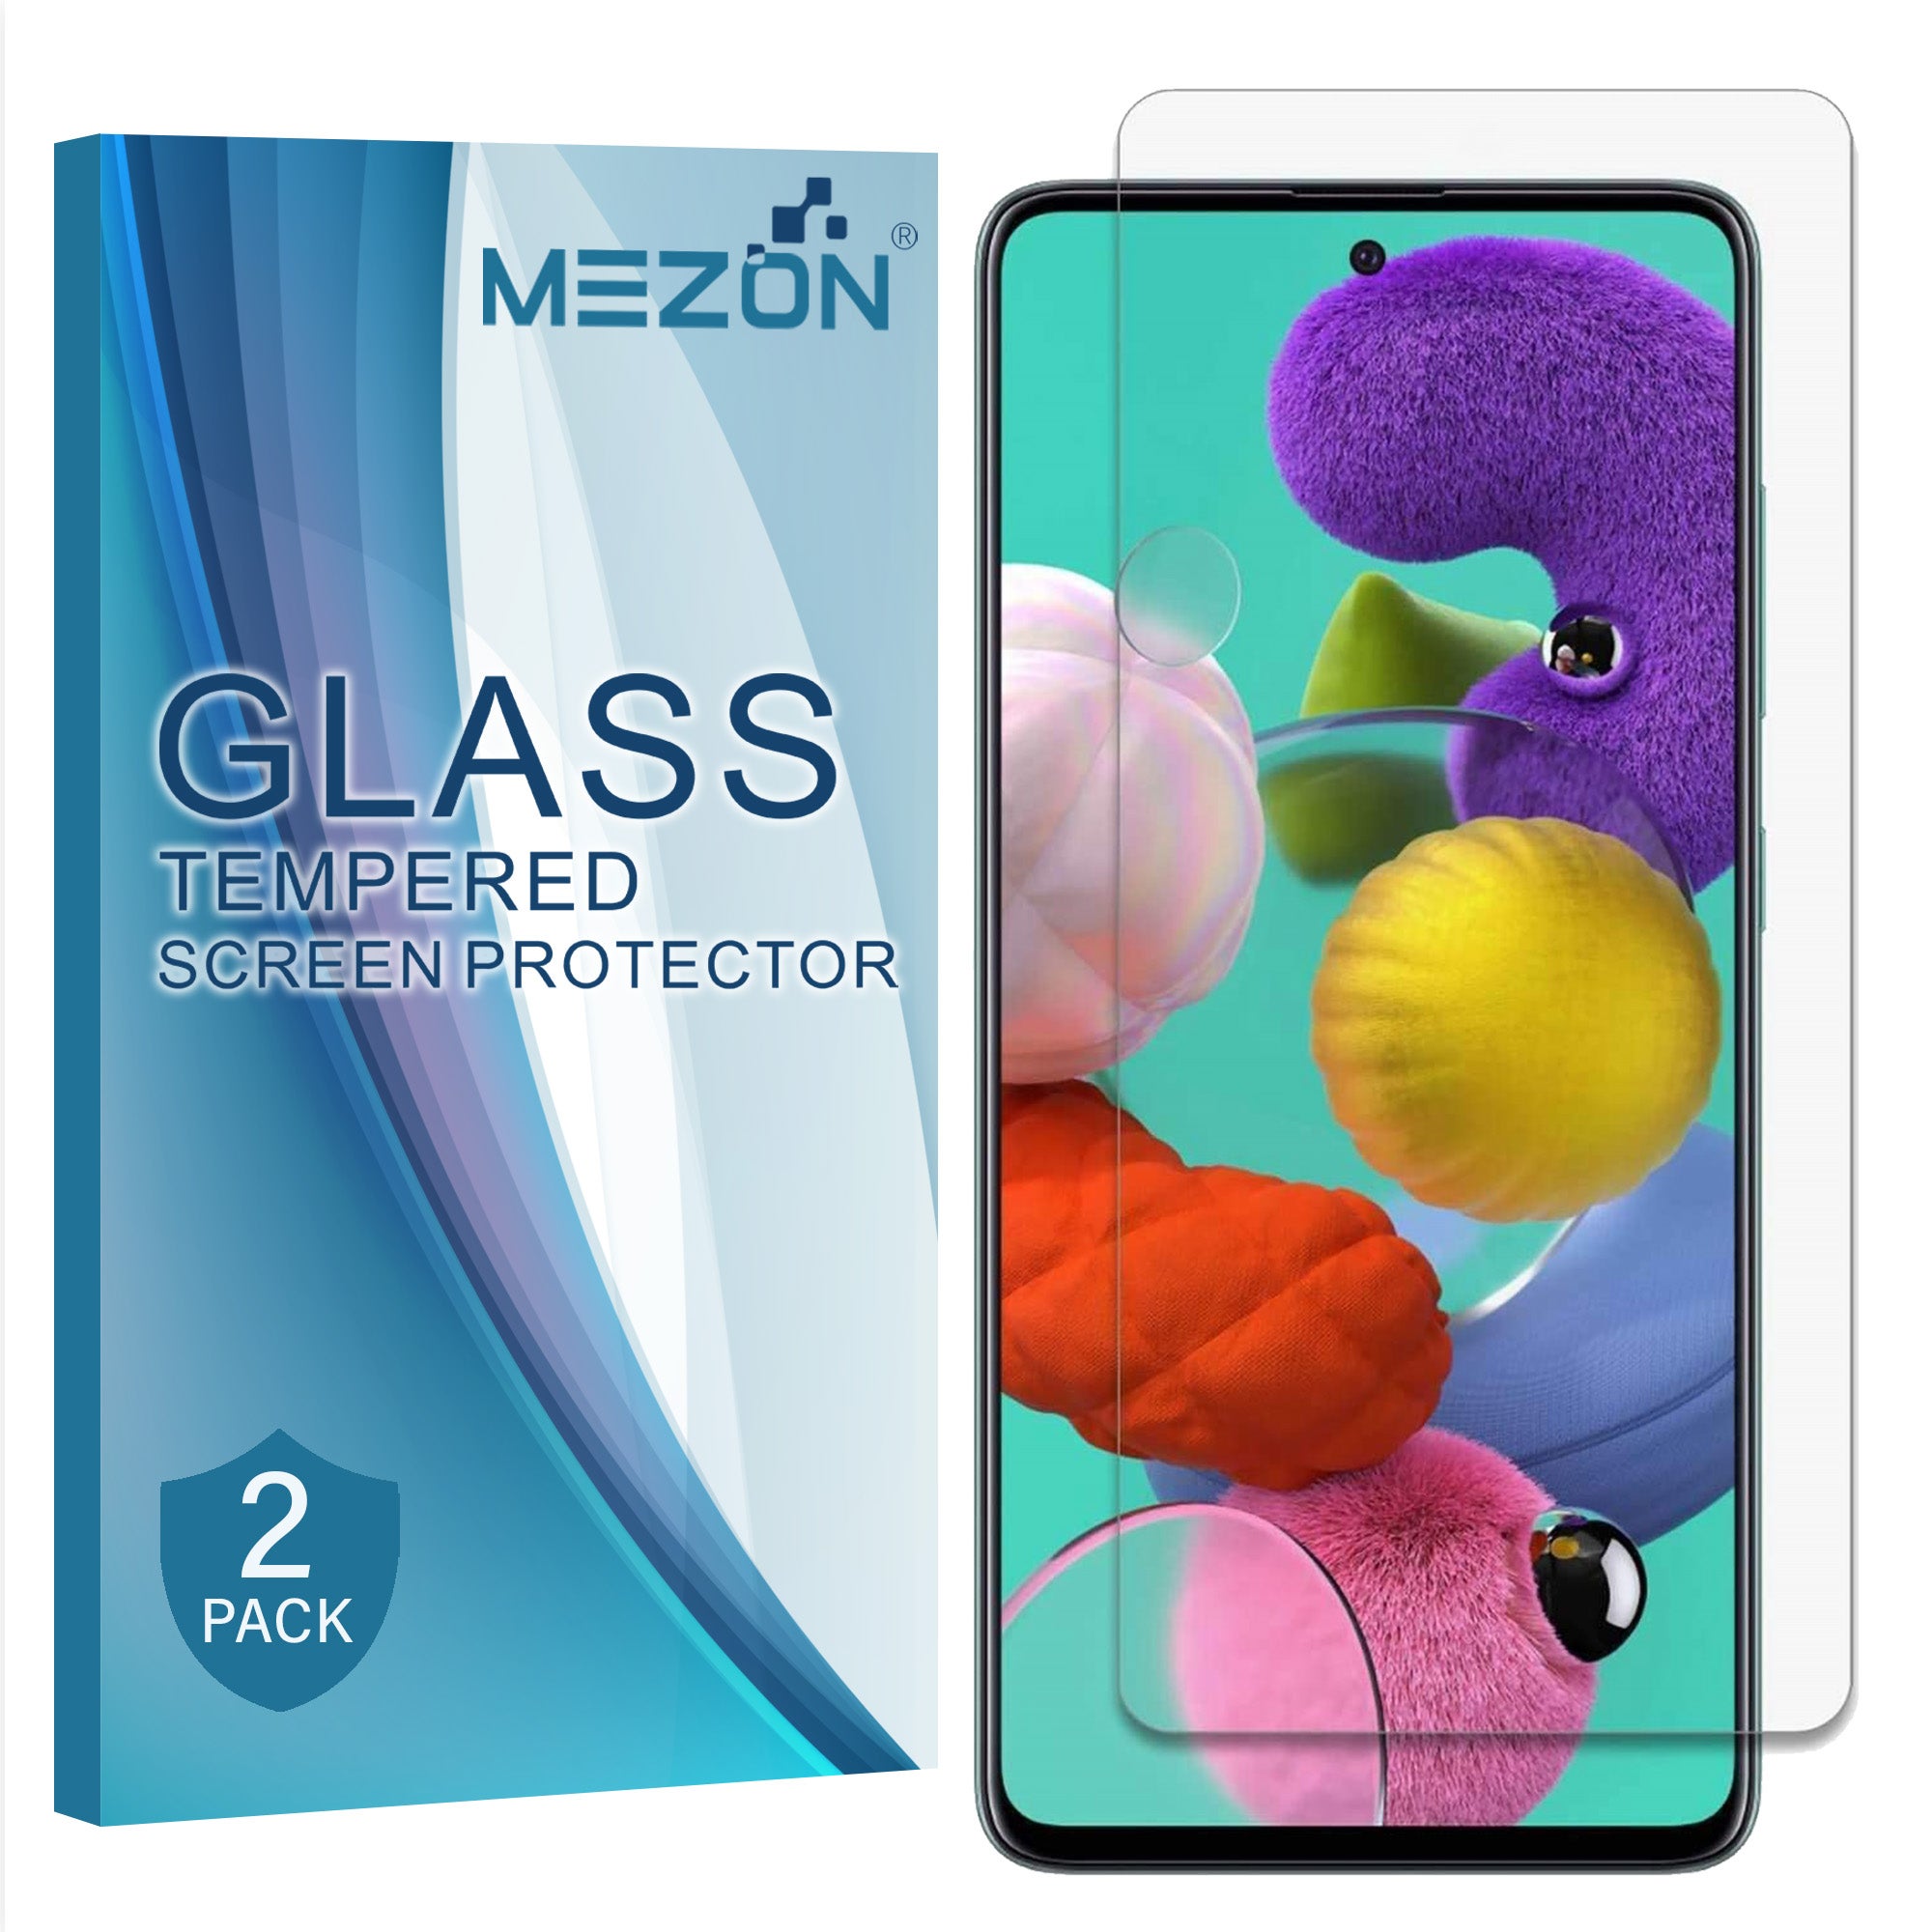 [2 Pack] Samsung Galaxy A51 Tempered Glass Crystal Clear Premium 9H HD Screen Protector by MEZON – Case Friendly, Shock Absorption (A51, 9H)